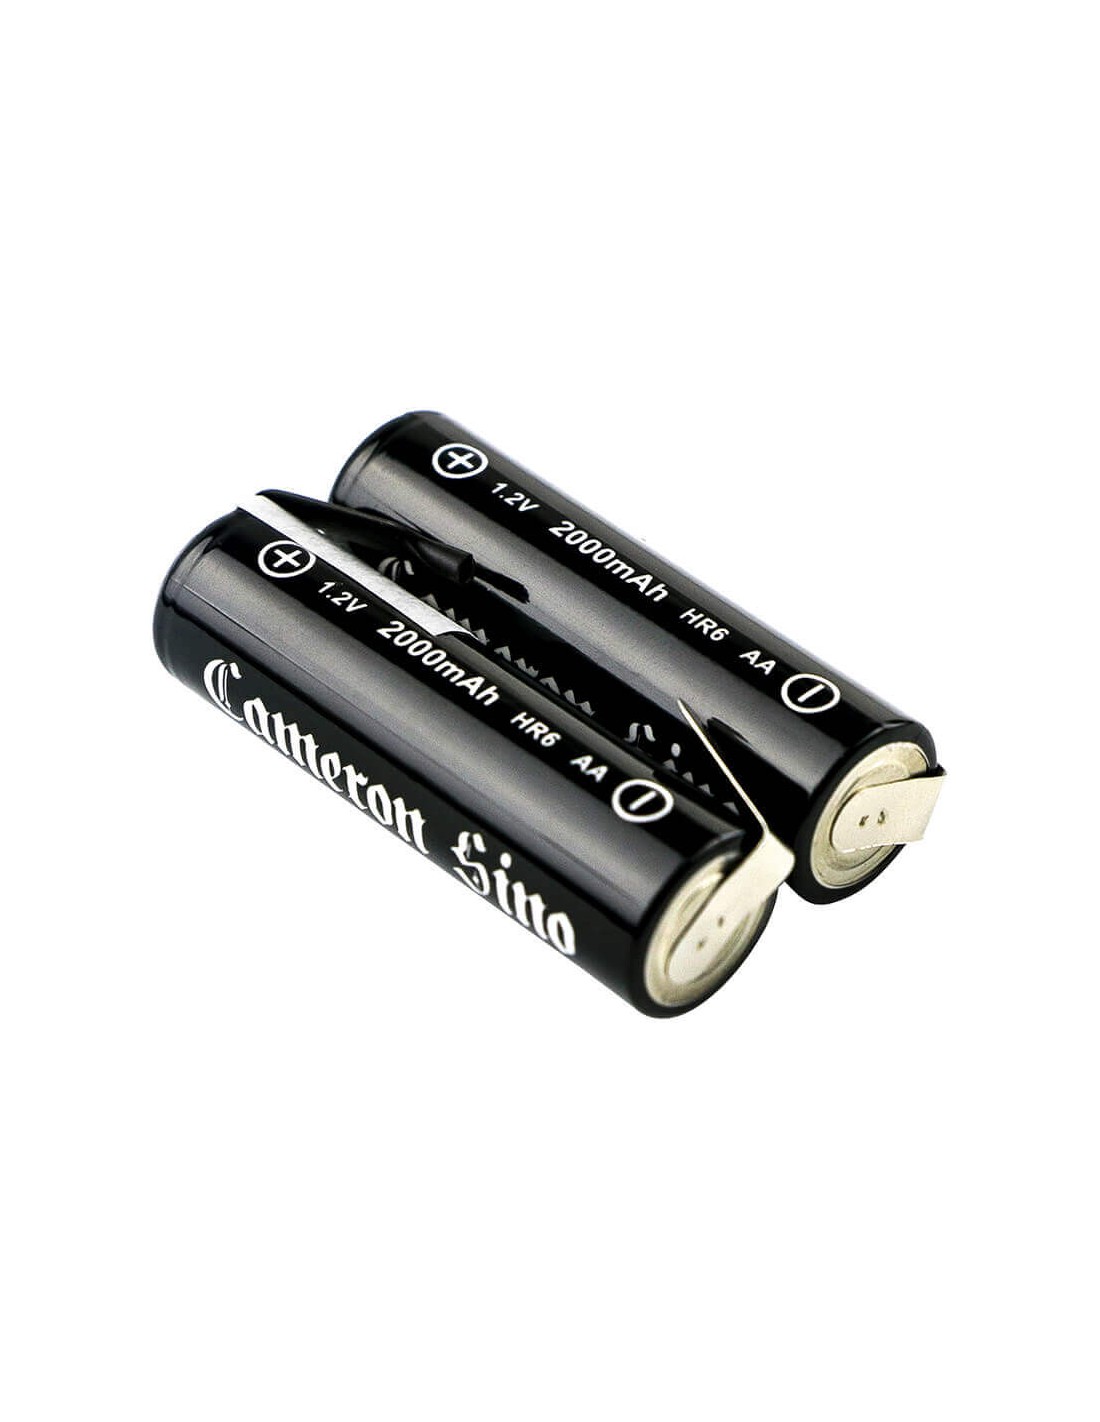 Two Battery ies for Aa Aa, Am3, E91 - standard solder tabs direction 1.2V, 2000mAh - 2.40Wh